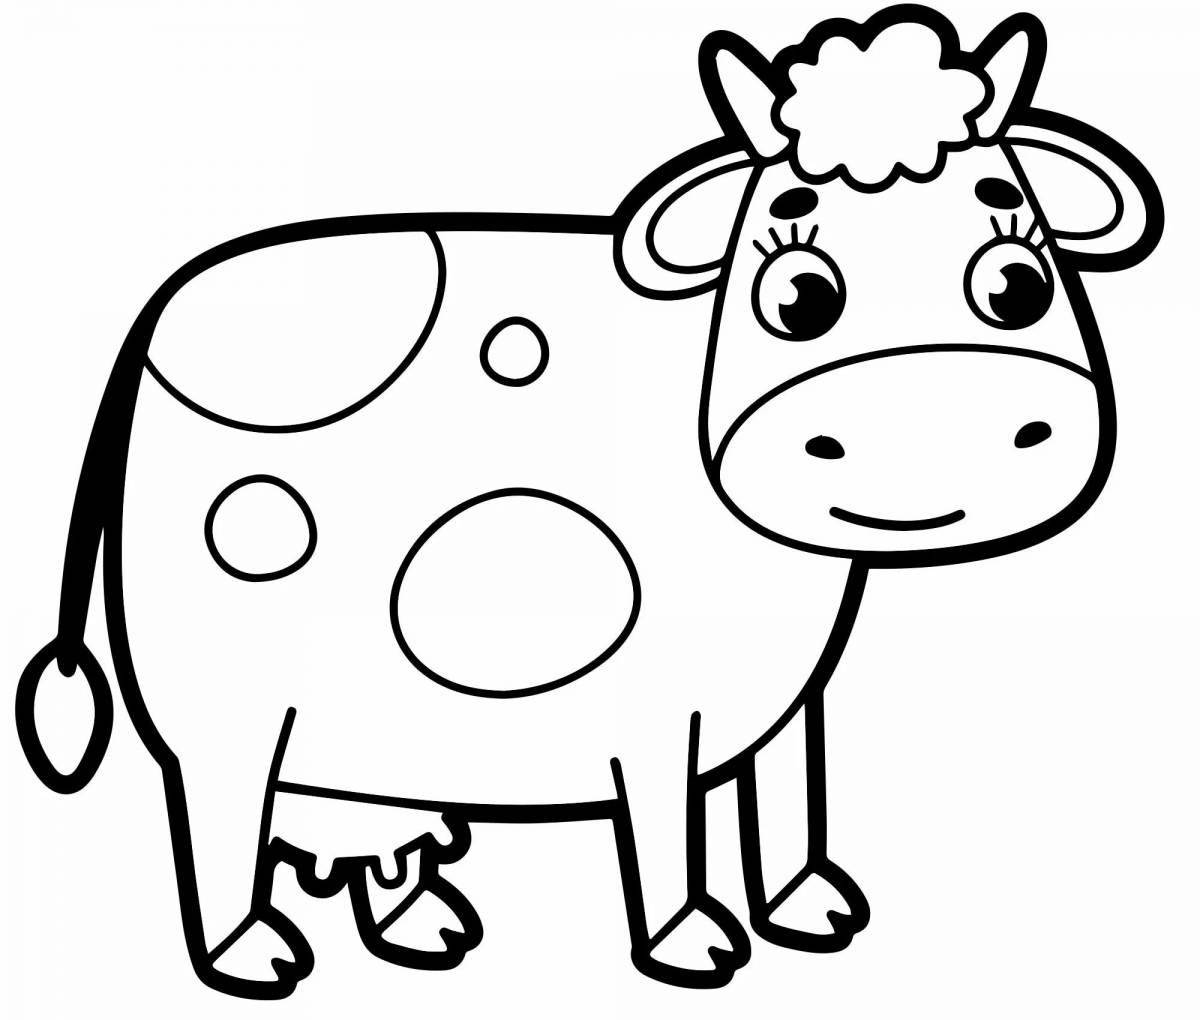 Drawing of a fluffy cow